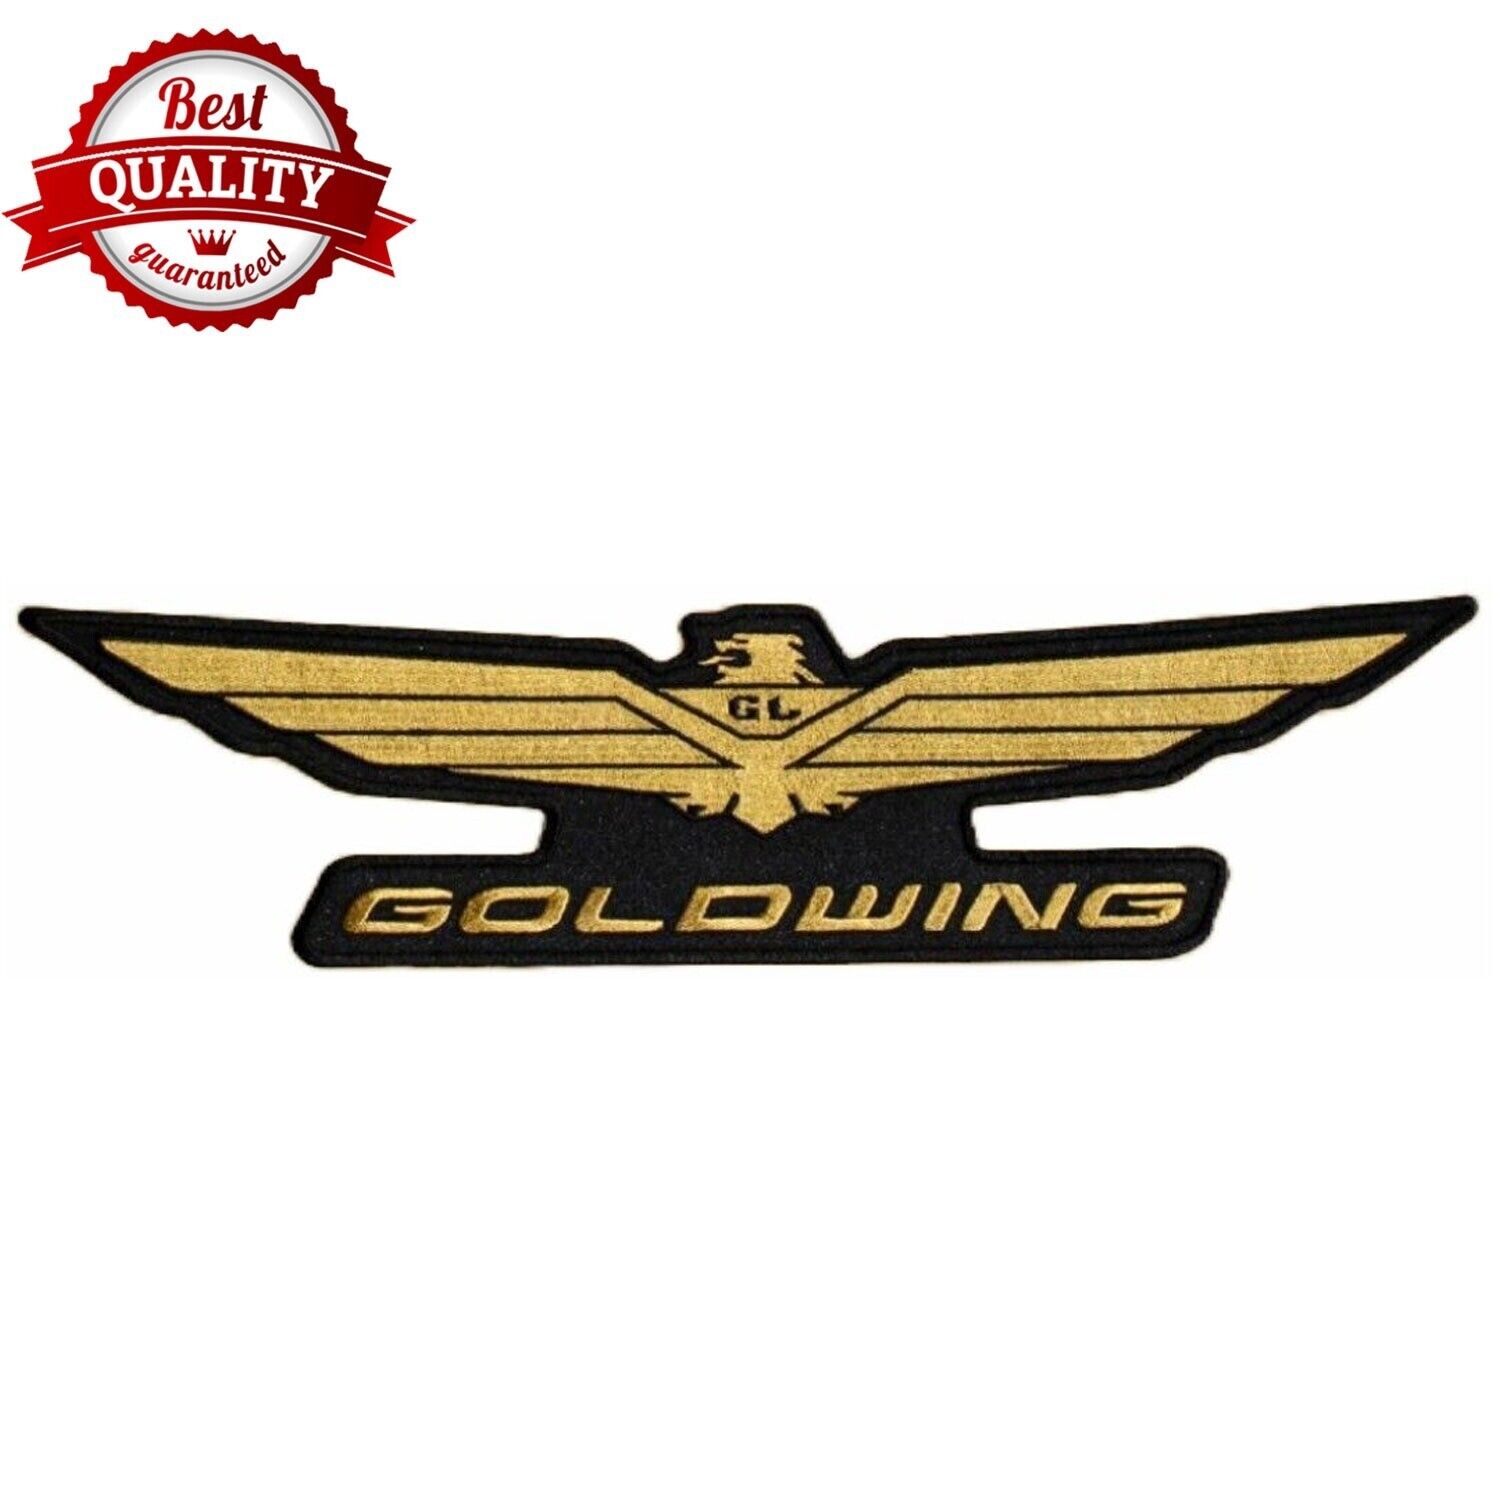 100Pc Honda Goldwing Jacket Vest Back Embroidered Patches - Iron on Patch 3\